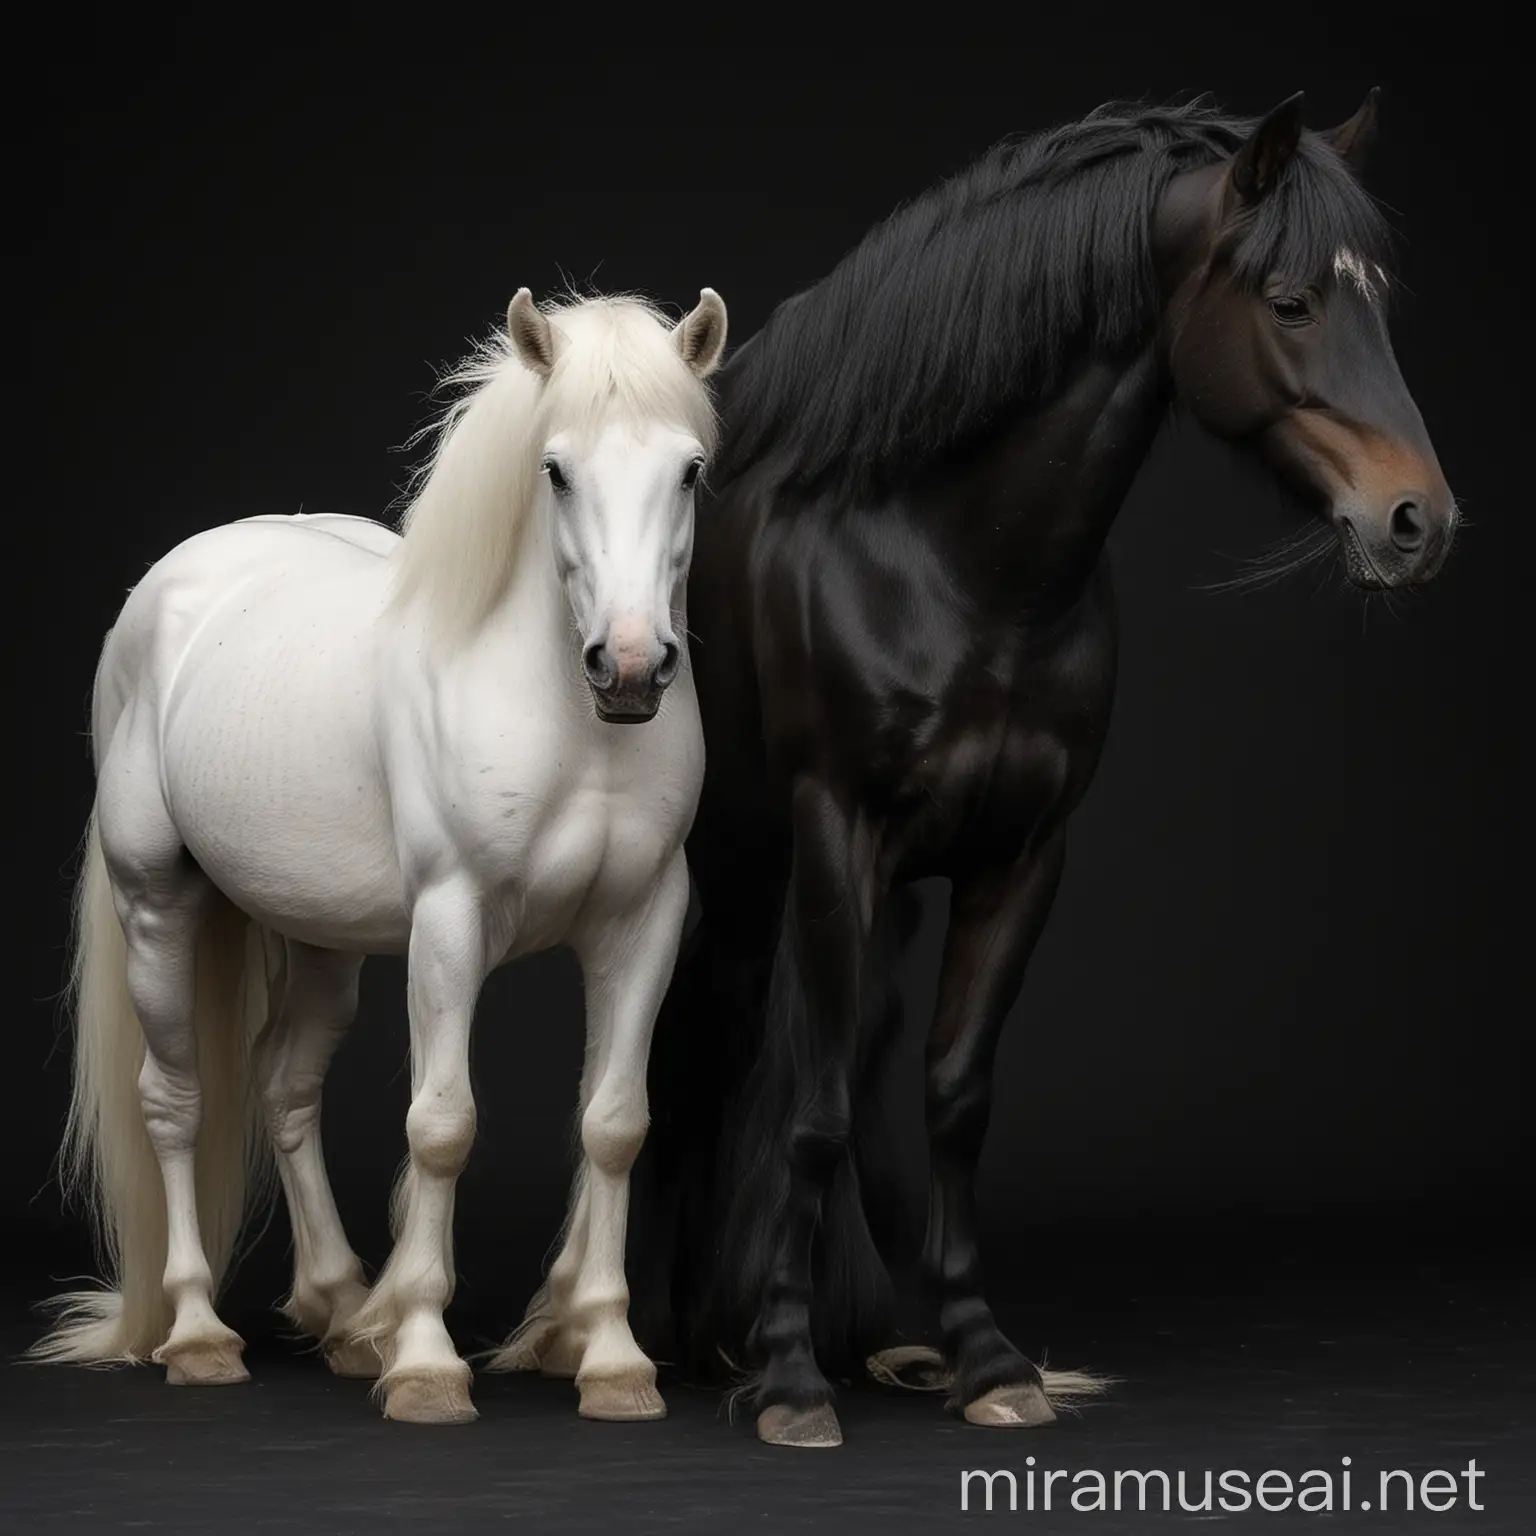 Two Black Horses with White Hair in Dramatic Black Background